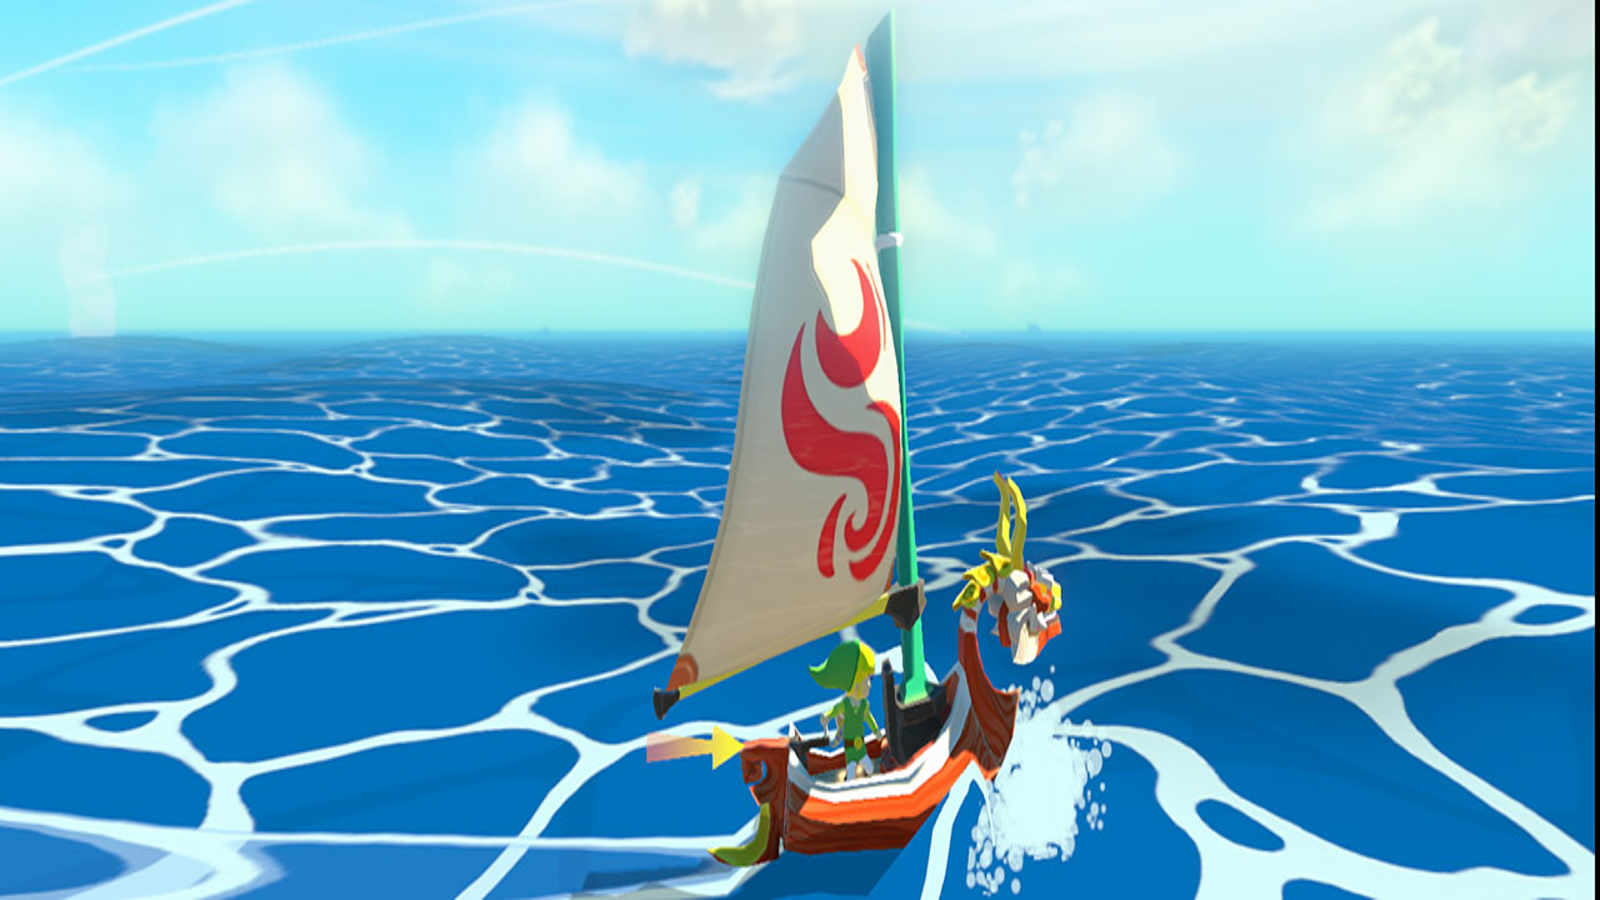 In the Legend of Zelda: The Wind Waker, the player's avatar points to